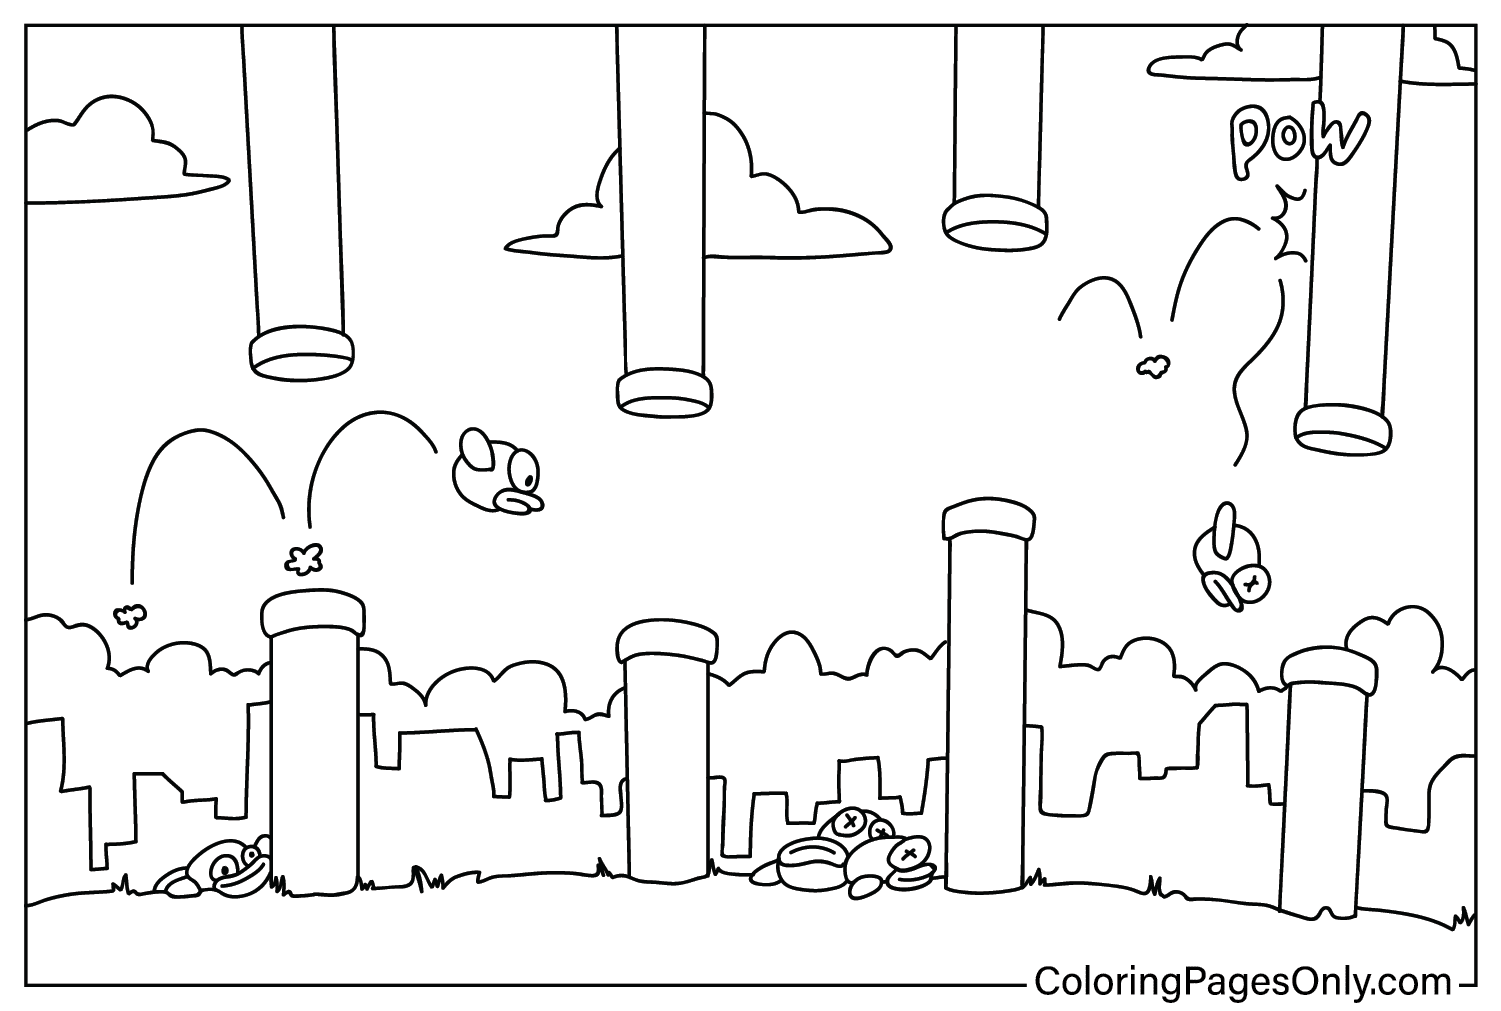 Coloring Sheet Flappy Bird from Flappy Bird